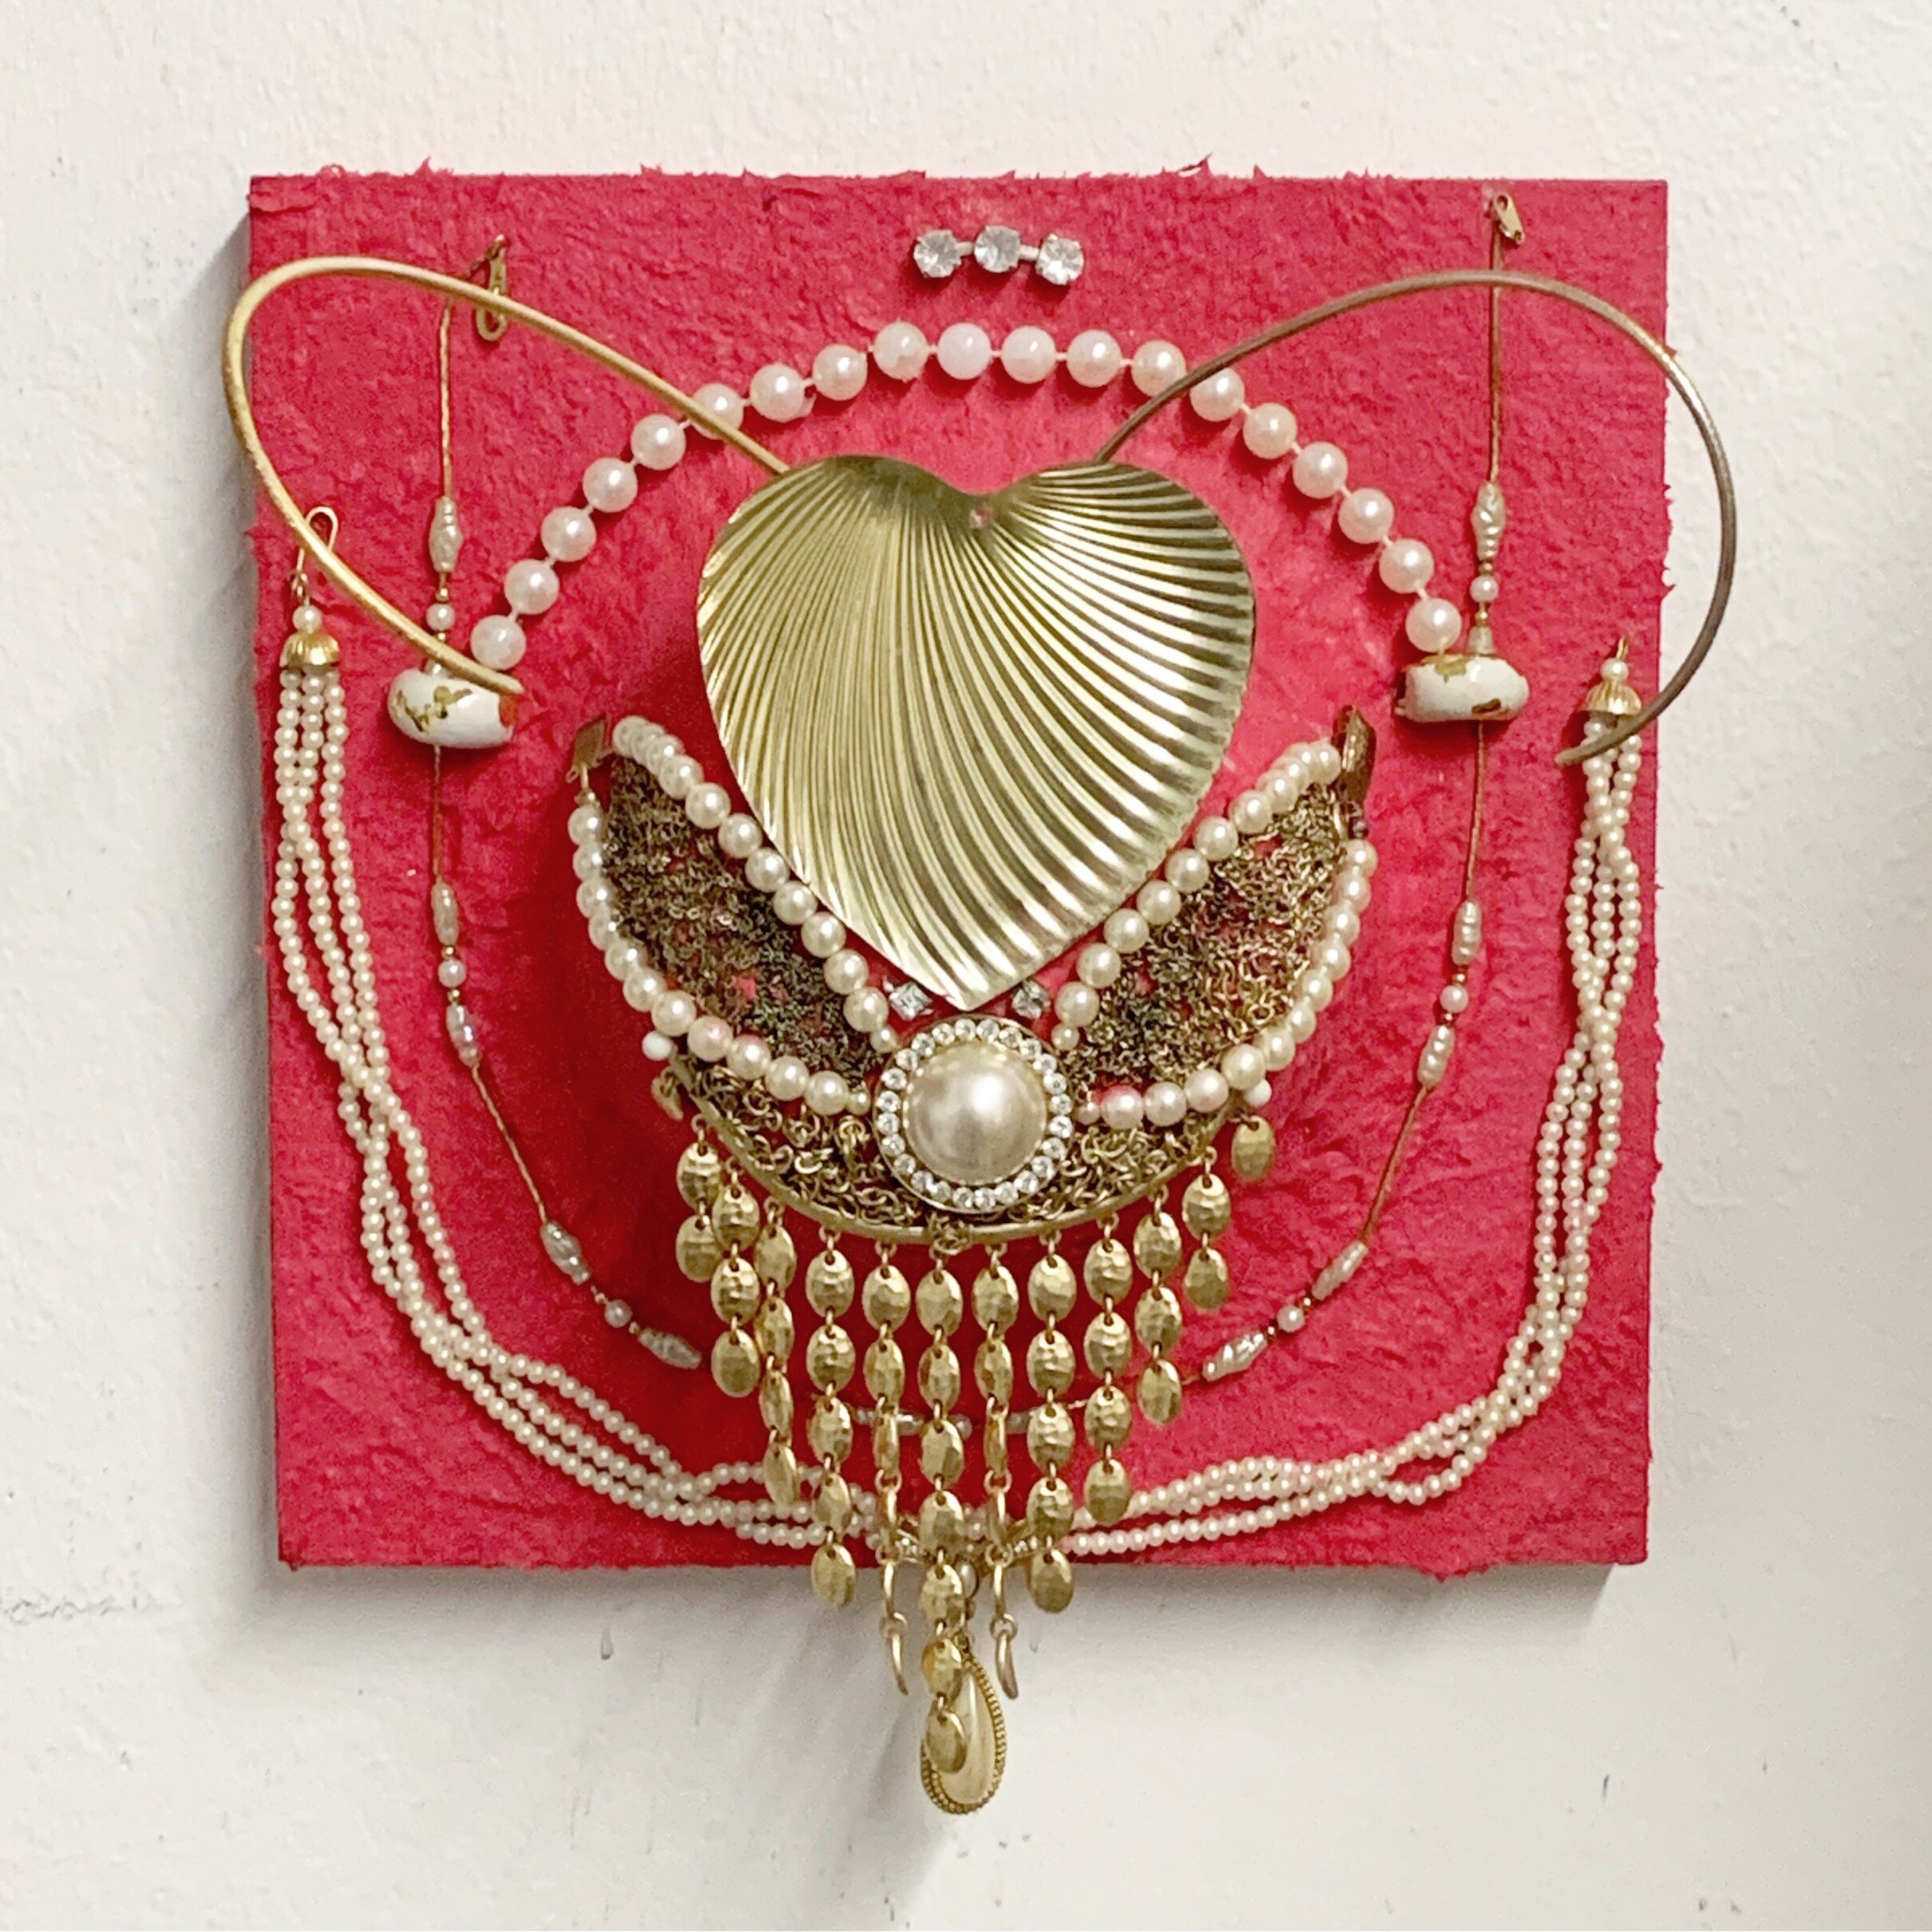   Cupid’s Chokehold,  2020, costume jewelry, faux pearls, rhinestones, and fiber paste on panel, 8x8” 